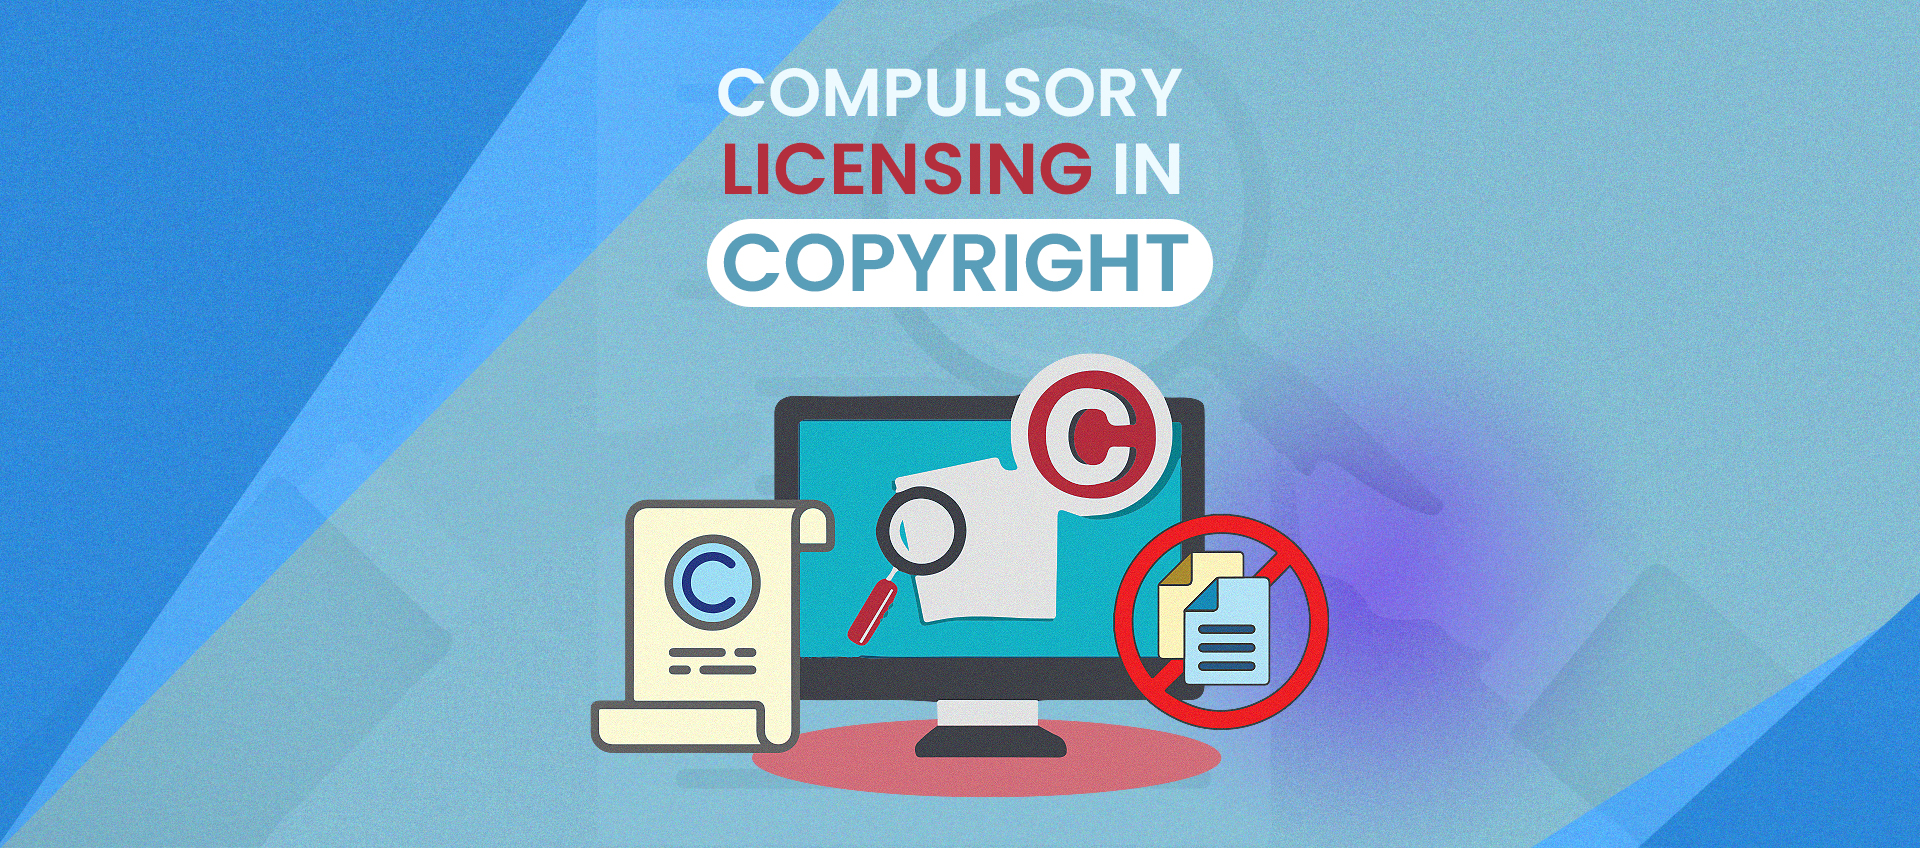 compulsory licensing in copyright